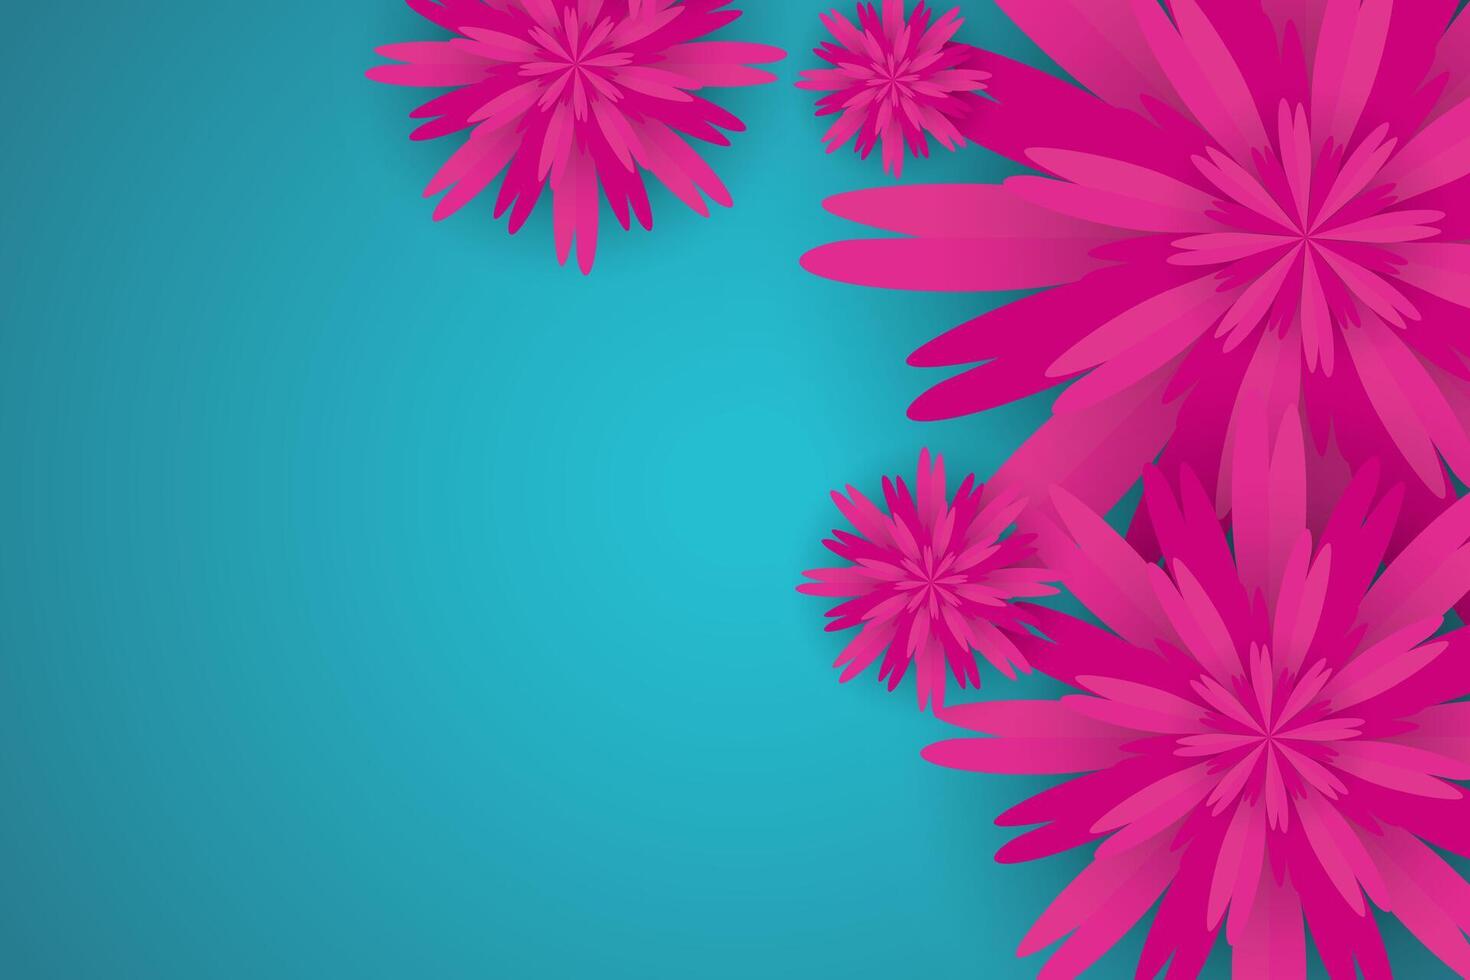 A Pink flower on light blue background, wallpaper, poster, post card vector design concepts for Women's day concept vector templates